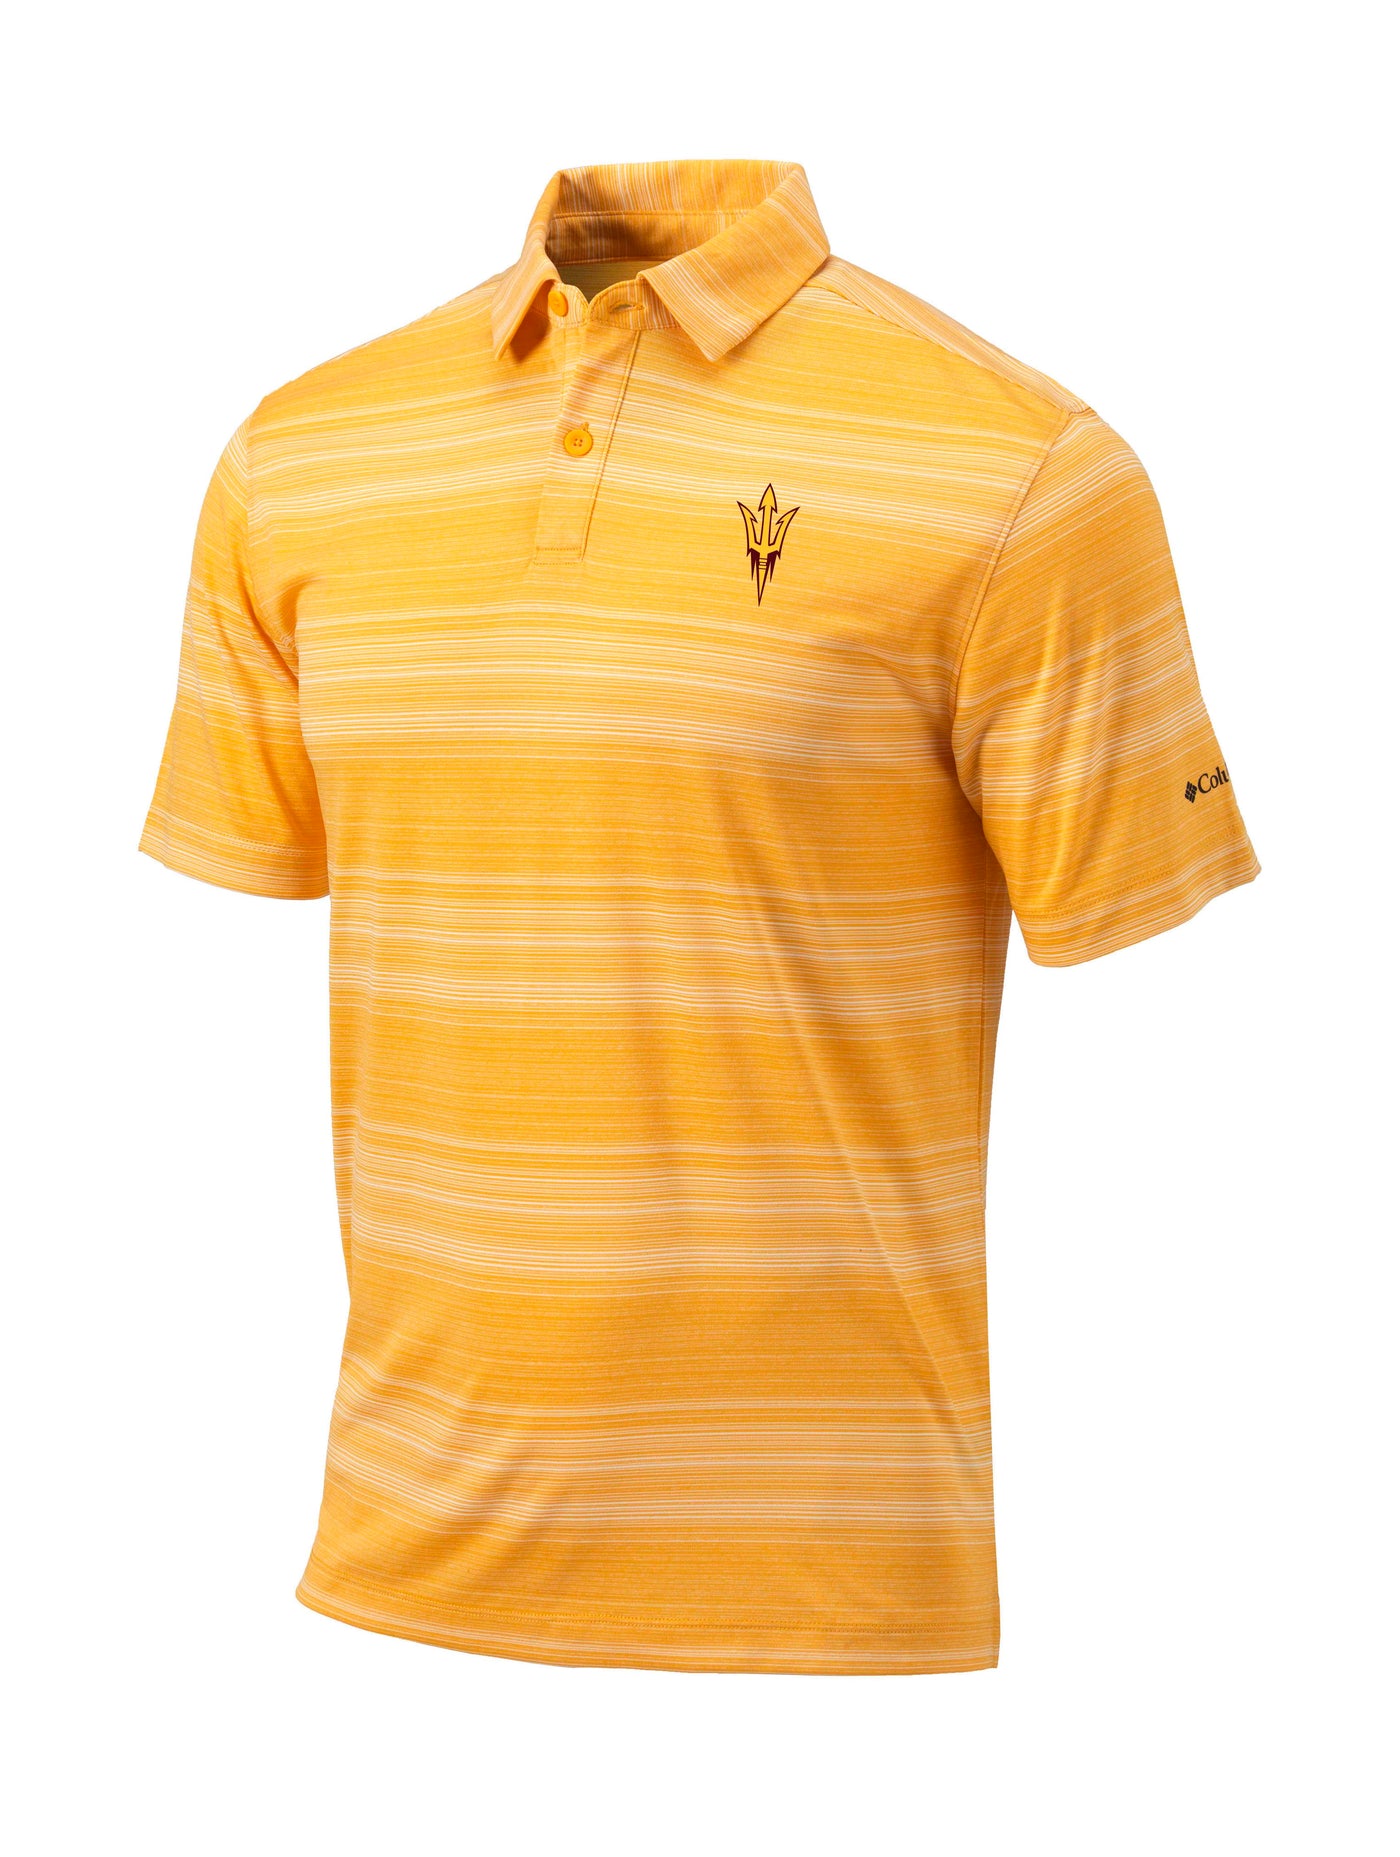 ASU gold and white striped polo with maroon pitchfork on upper left chest